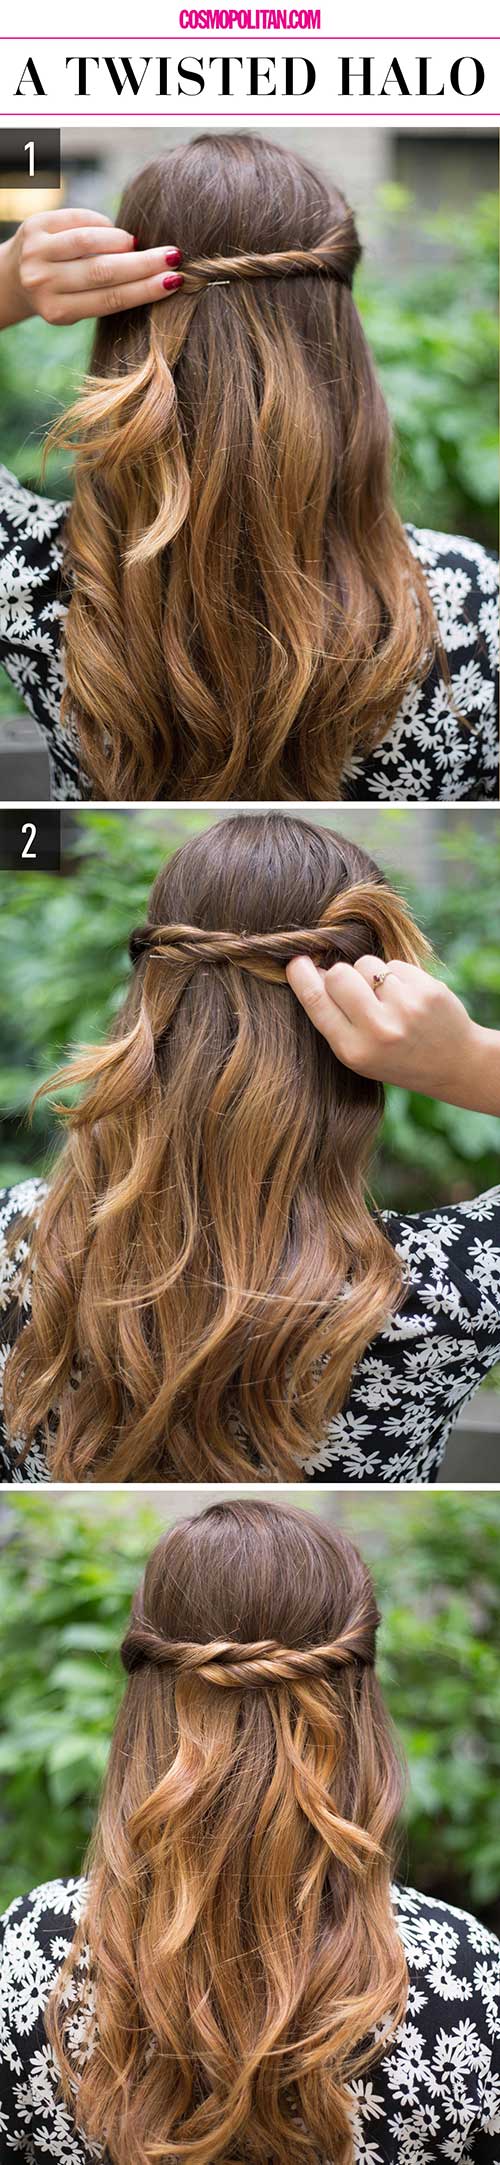 Twisted-Halo hairstyle for girls